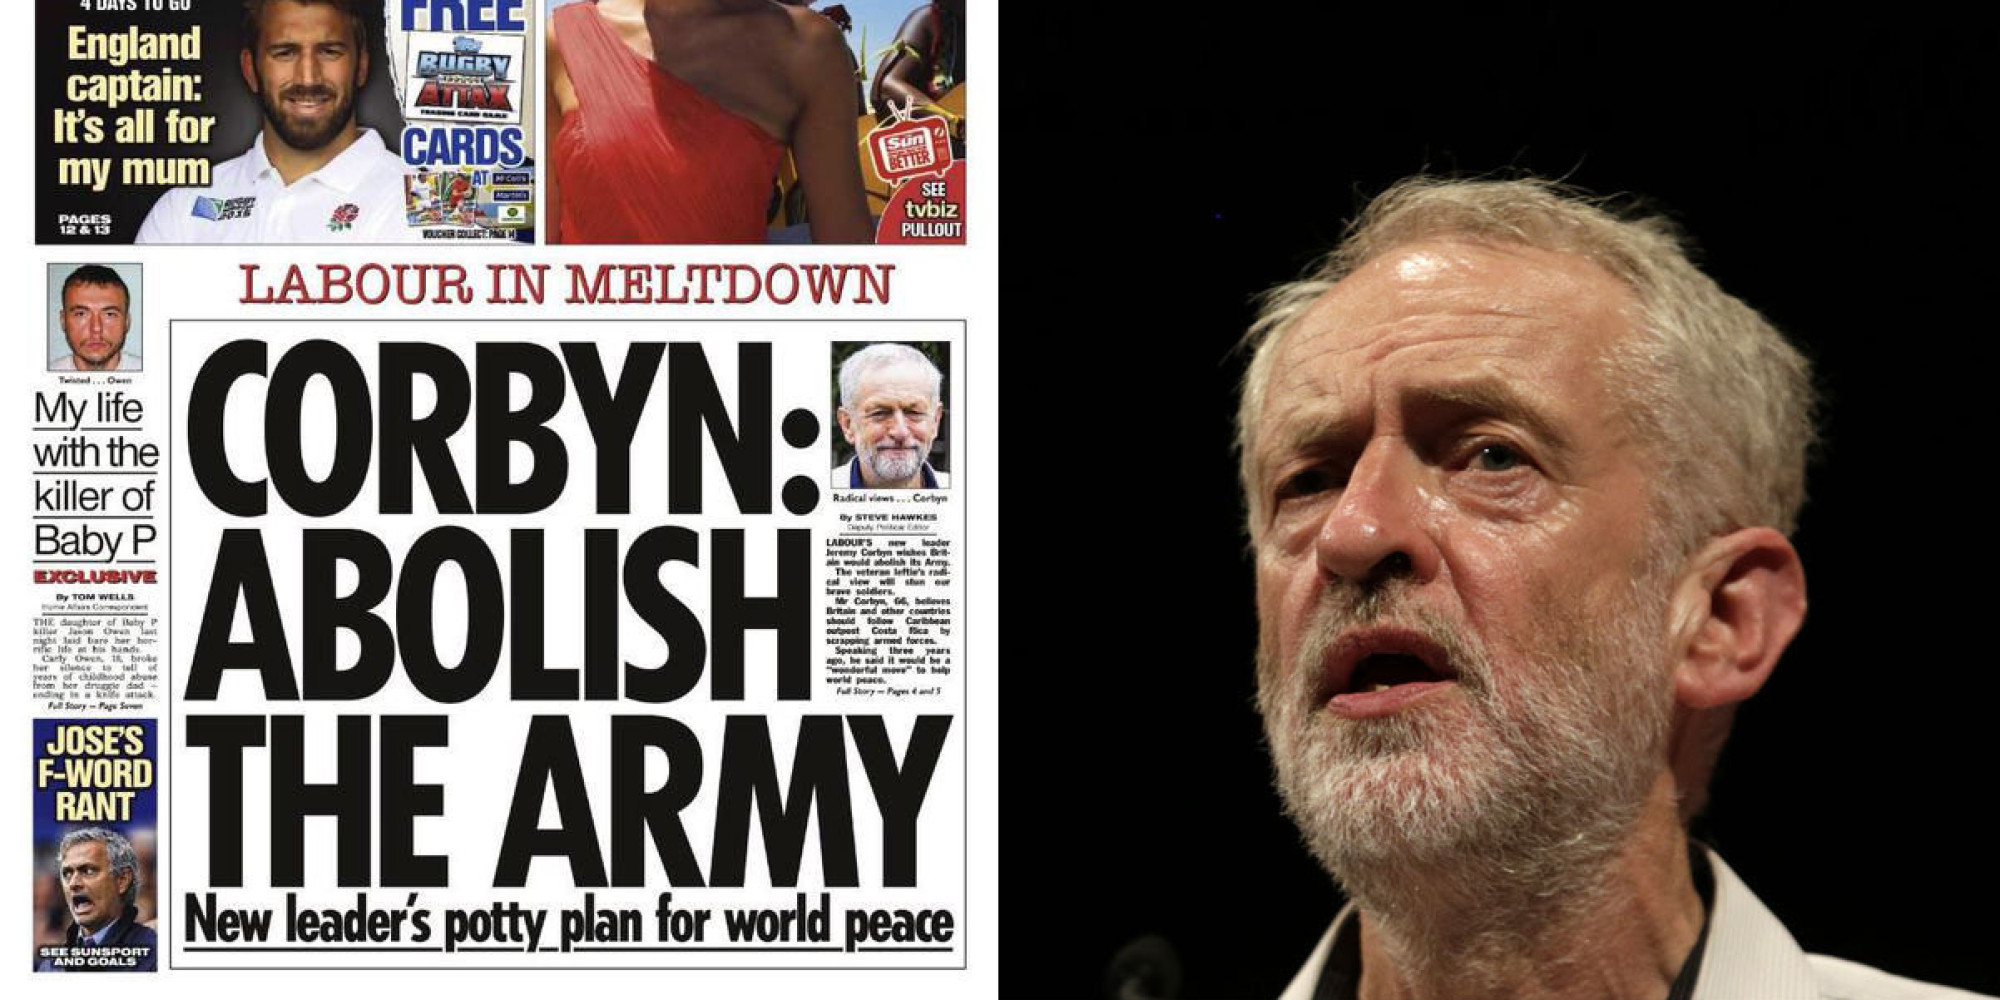 Jeremy Corbyn Wants To Abolish The Army, Apparently | HuffPost UK